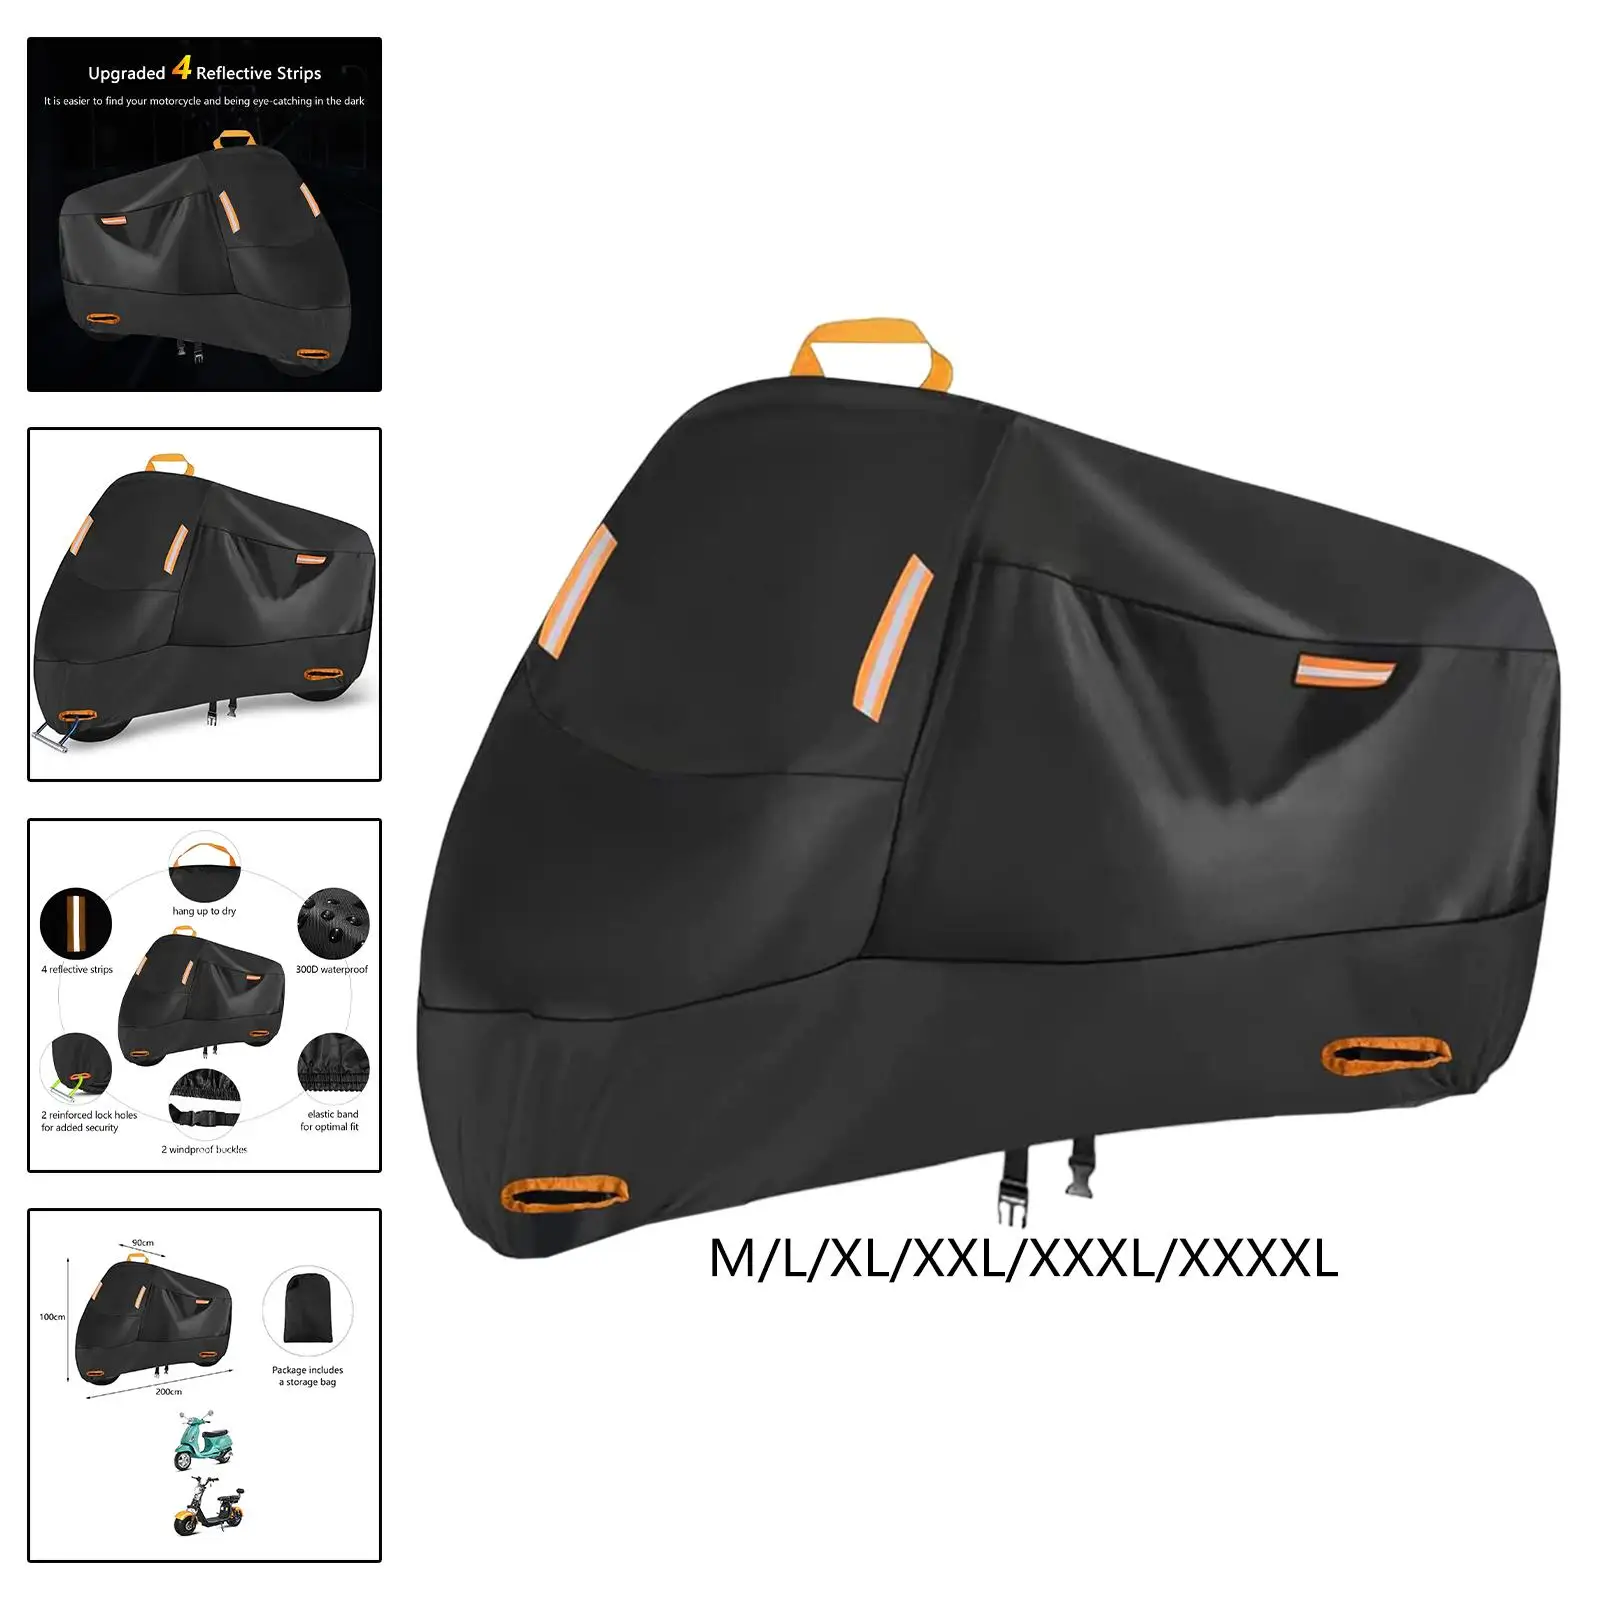 Motorcycle Cover Lock Holes with 4 Reflective Strips Motocross Rain Cover for Scooter Bike Motorbike Outdoor Protection